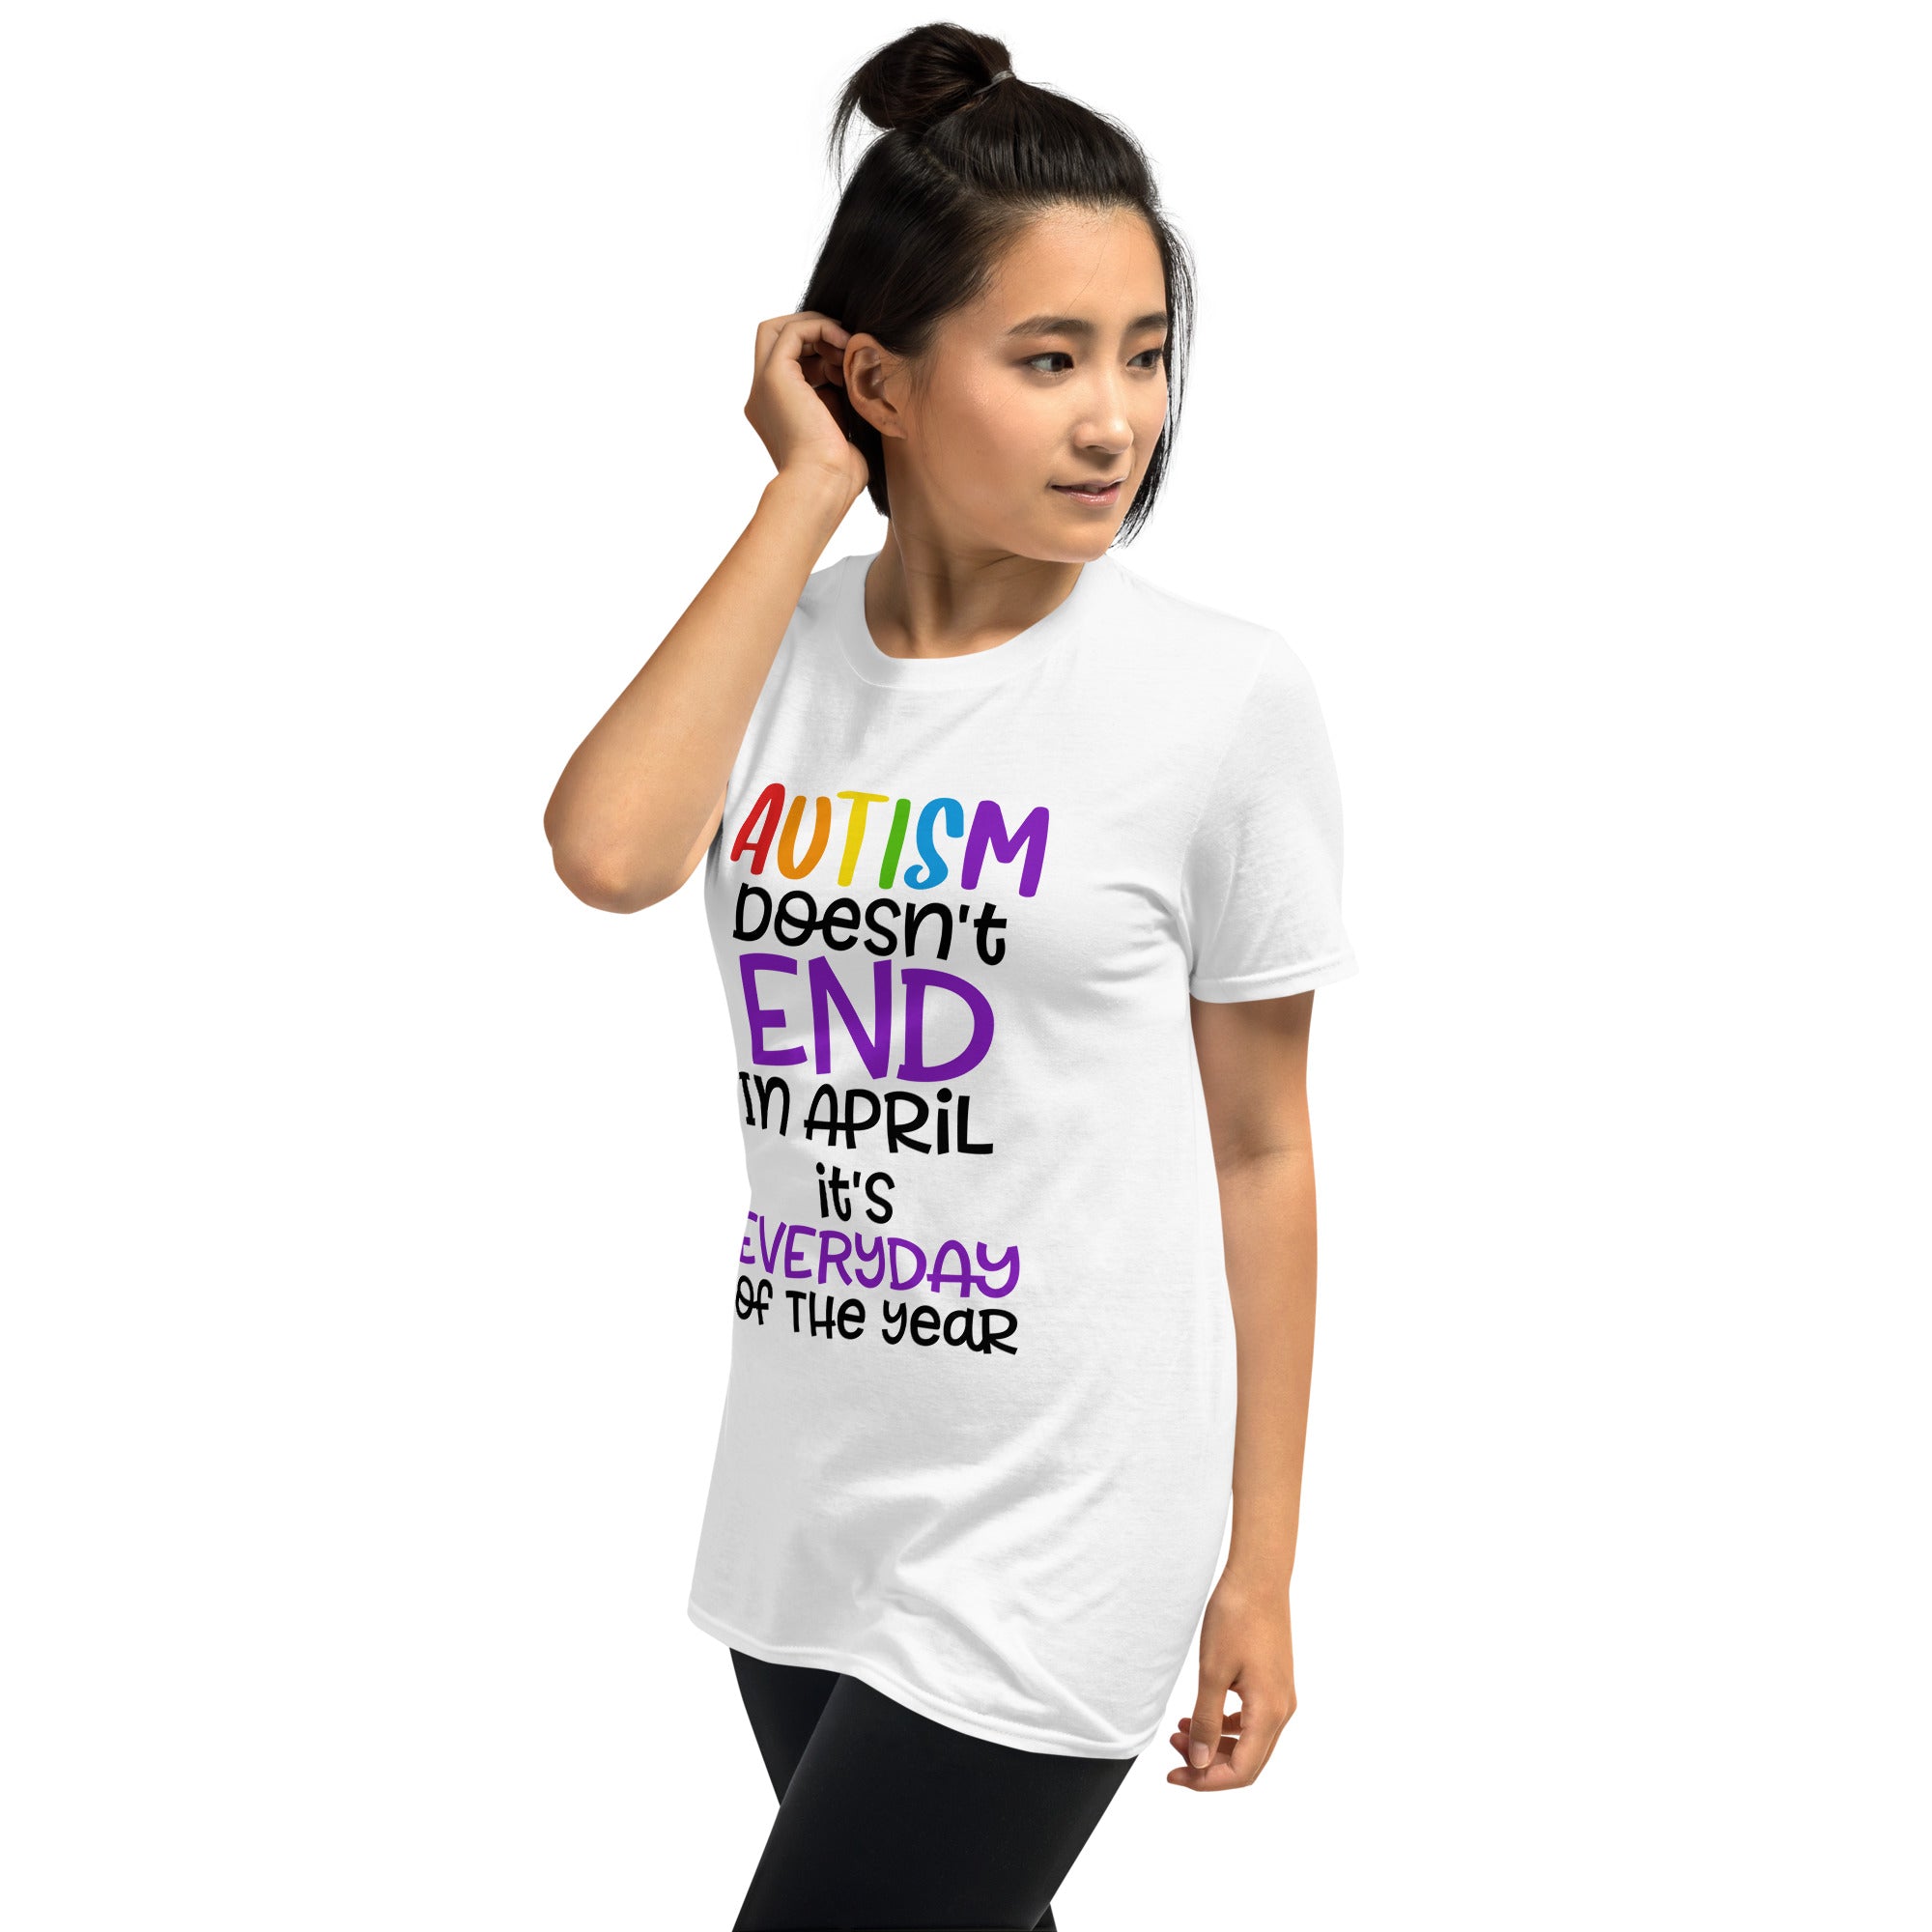 Short-Sleeve Unisex T-Shirt- Autism doesn t end in april